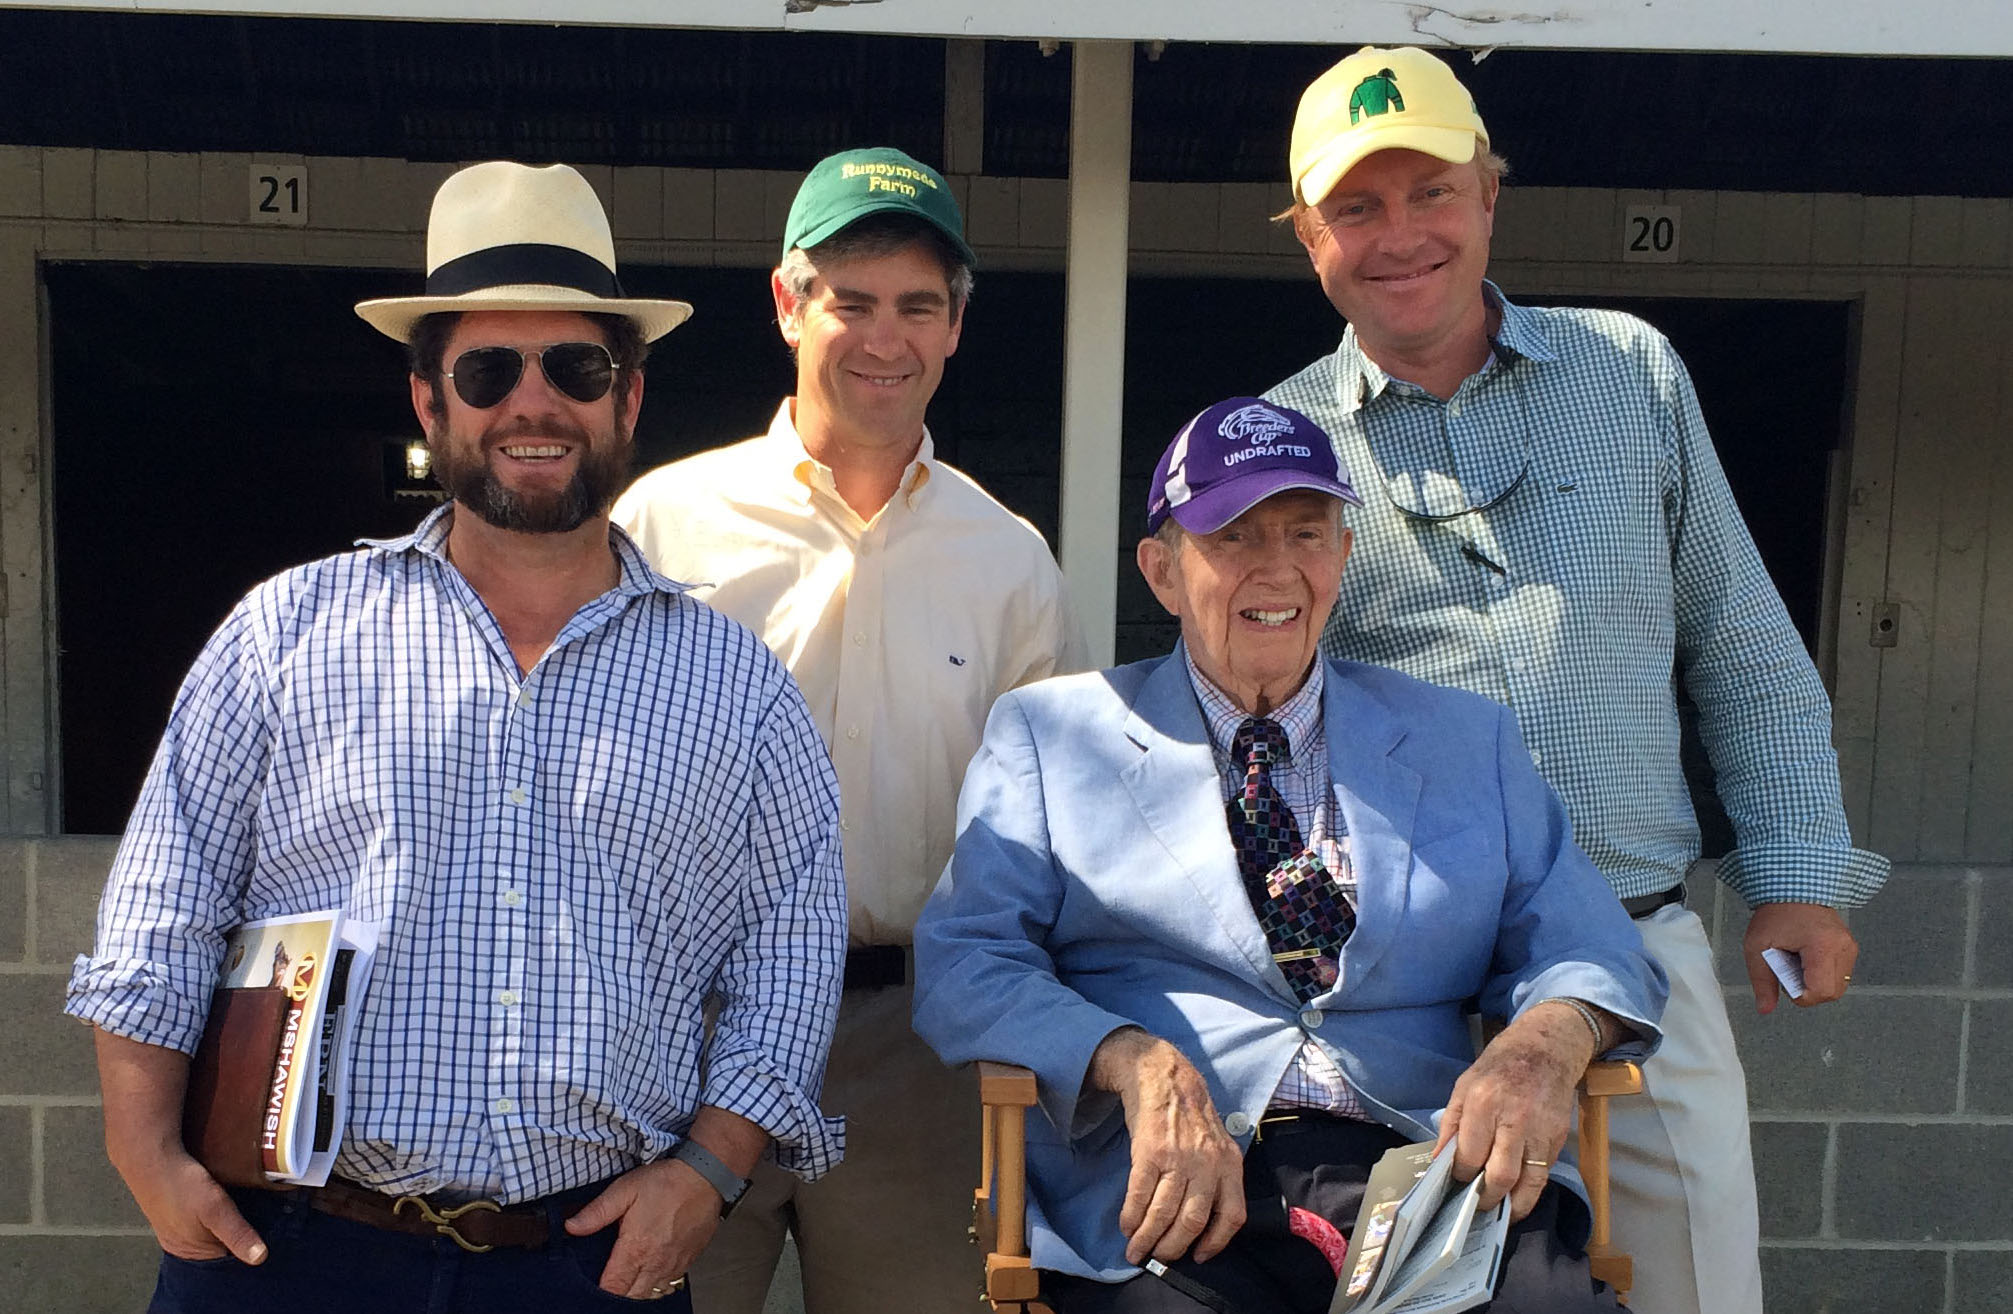 The men behind Runnymede Farm: from left, Joe Clay (a brother of Brutus Clay), Chief Executive Brutus Clay, Catesby W. Clay and General Manager Romain Malhouitre during the recent Keeneland September yearling sale. Photo: Clay family